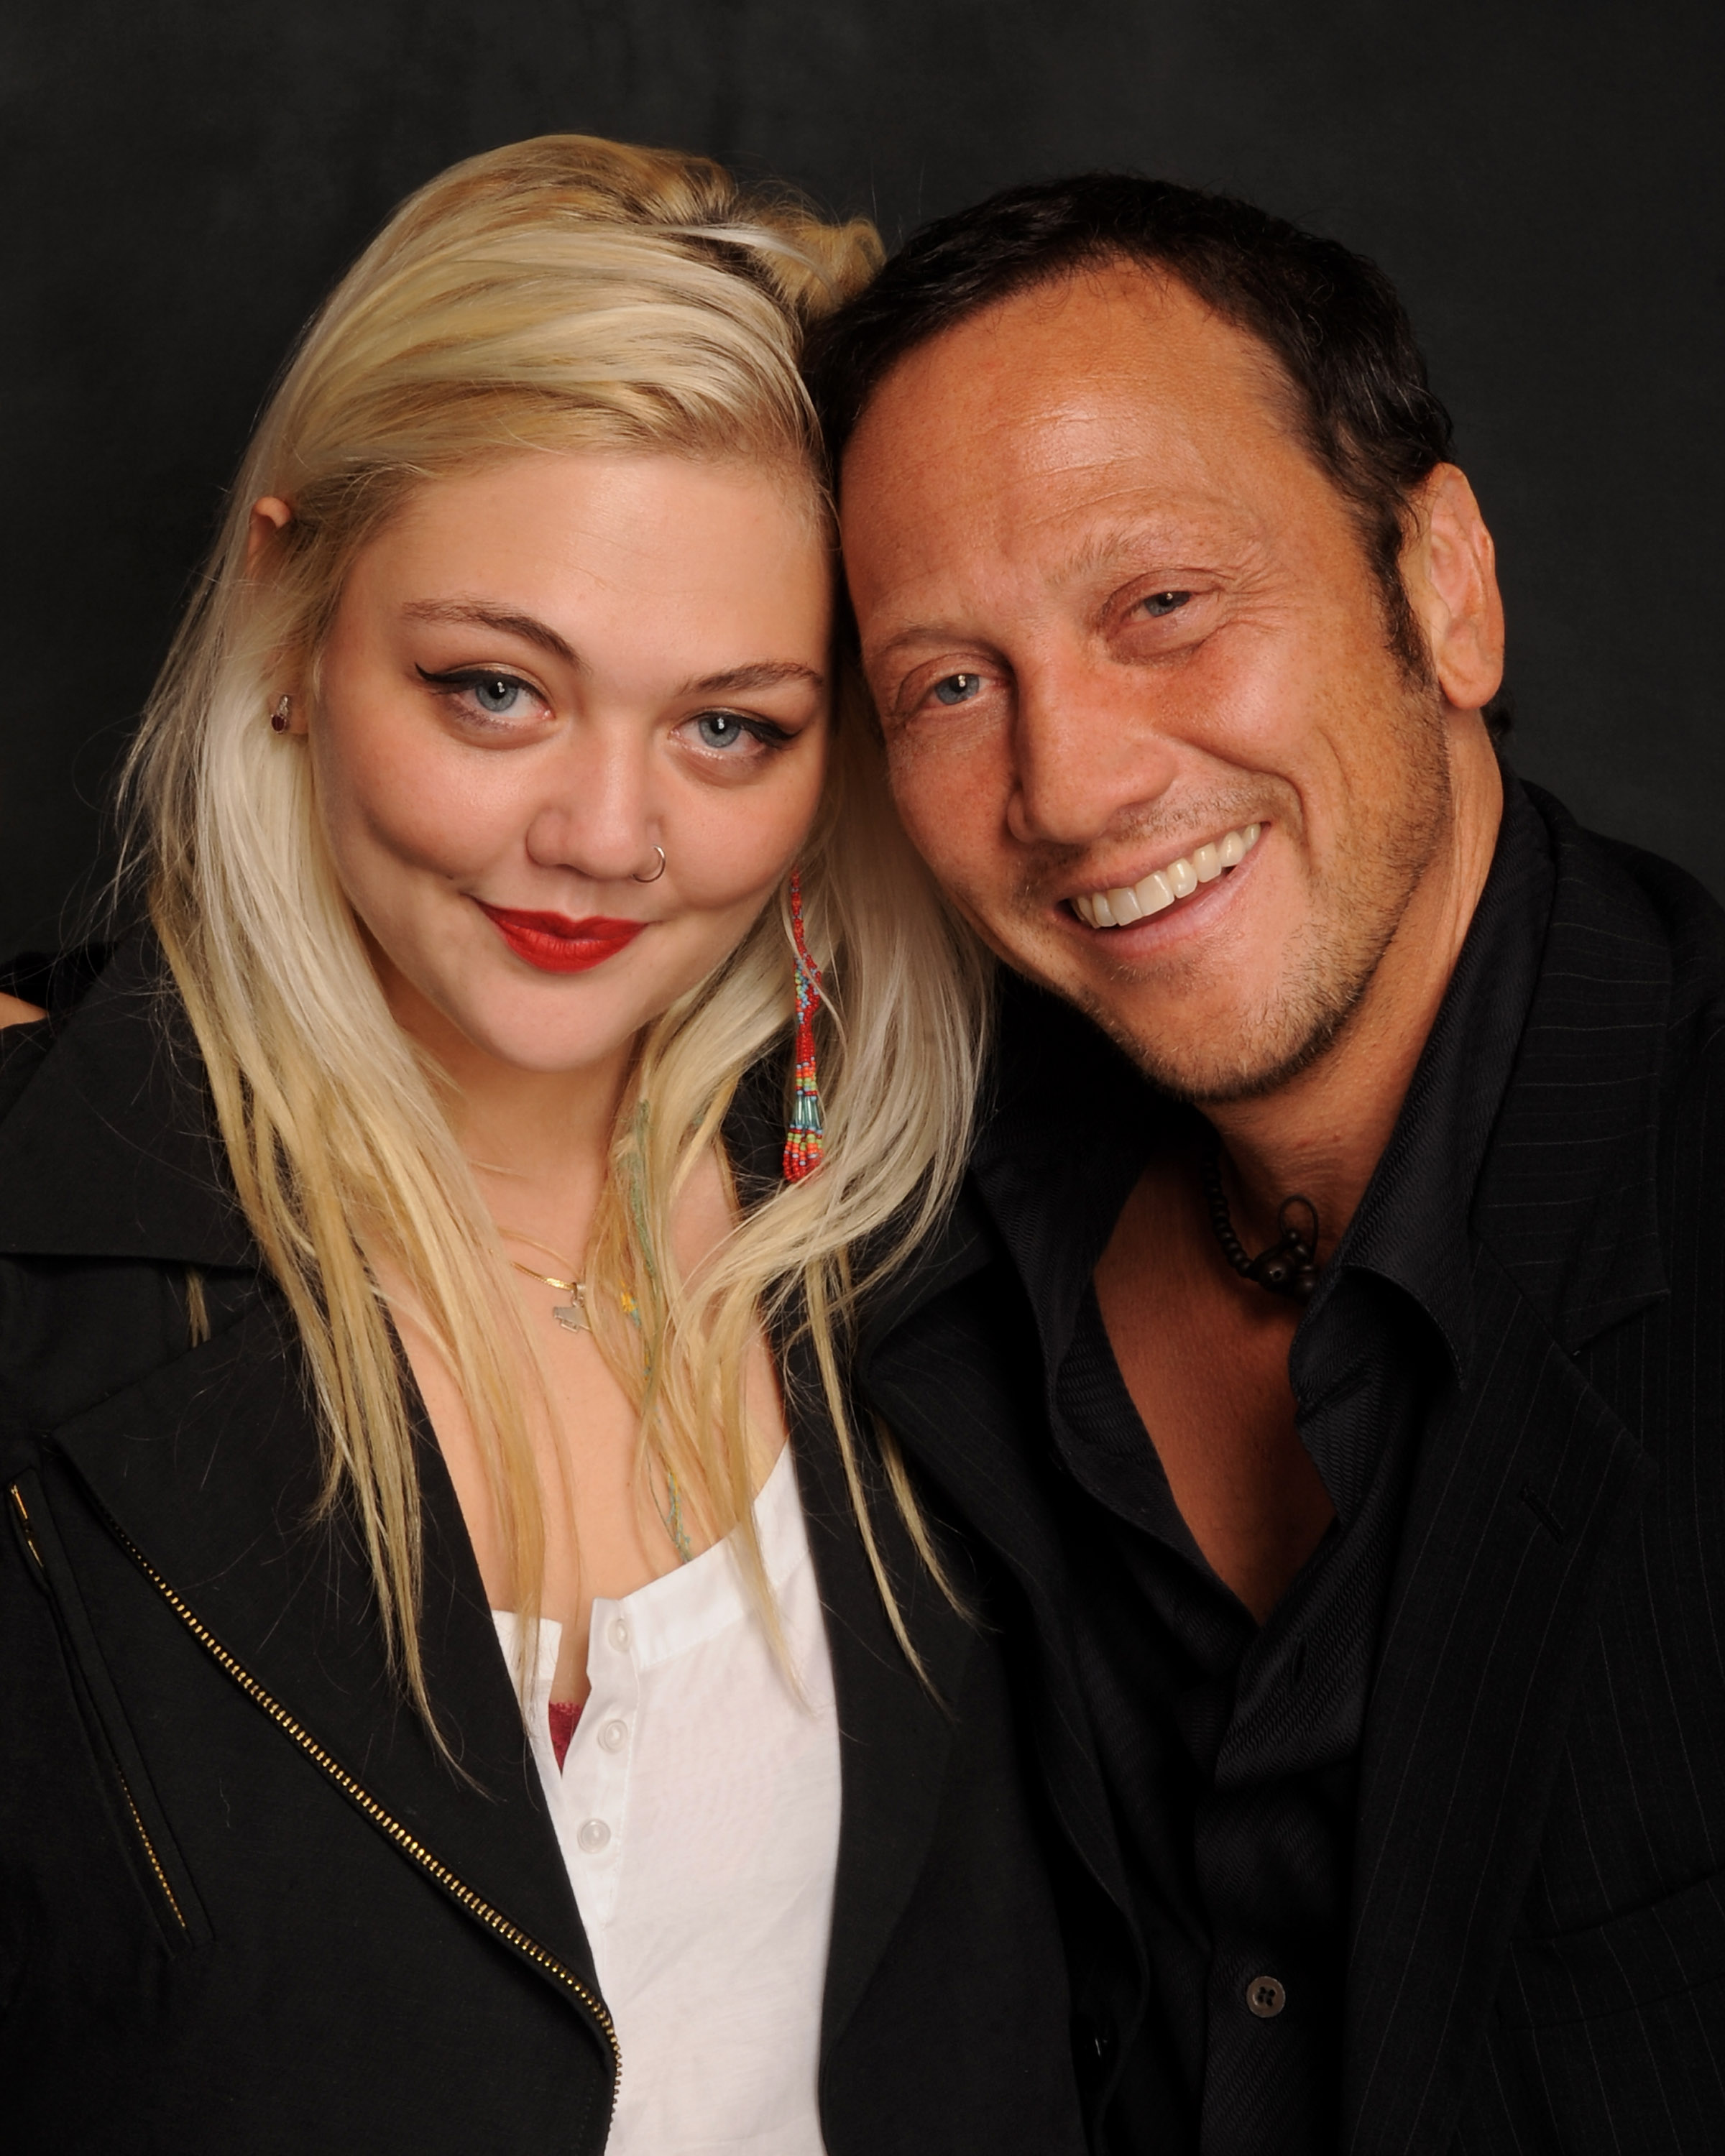 Elle King and her father Rob Schneider pose at The Ice House Comedy Club on October 15, 2009, in Pasadena, California. | Source: Getty Images